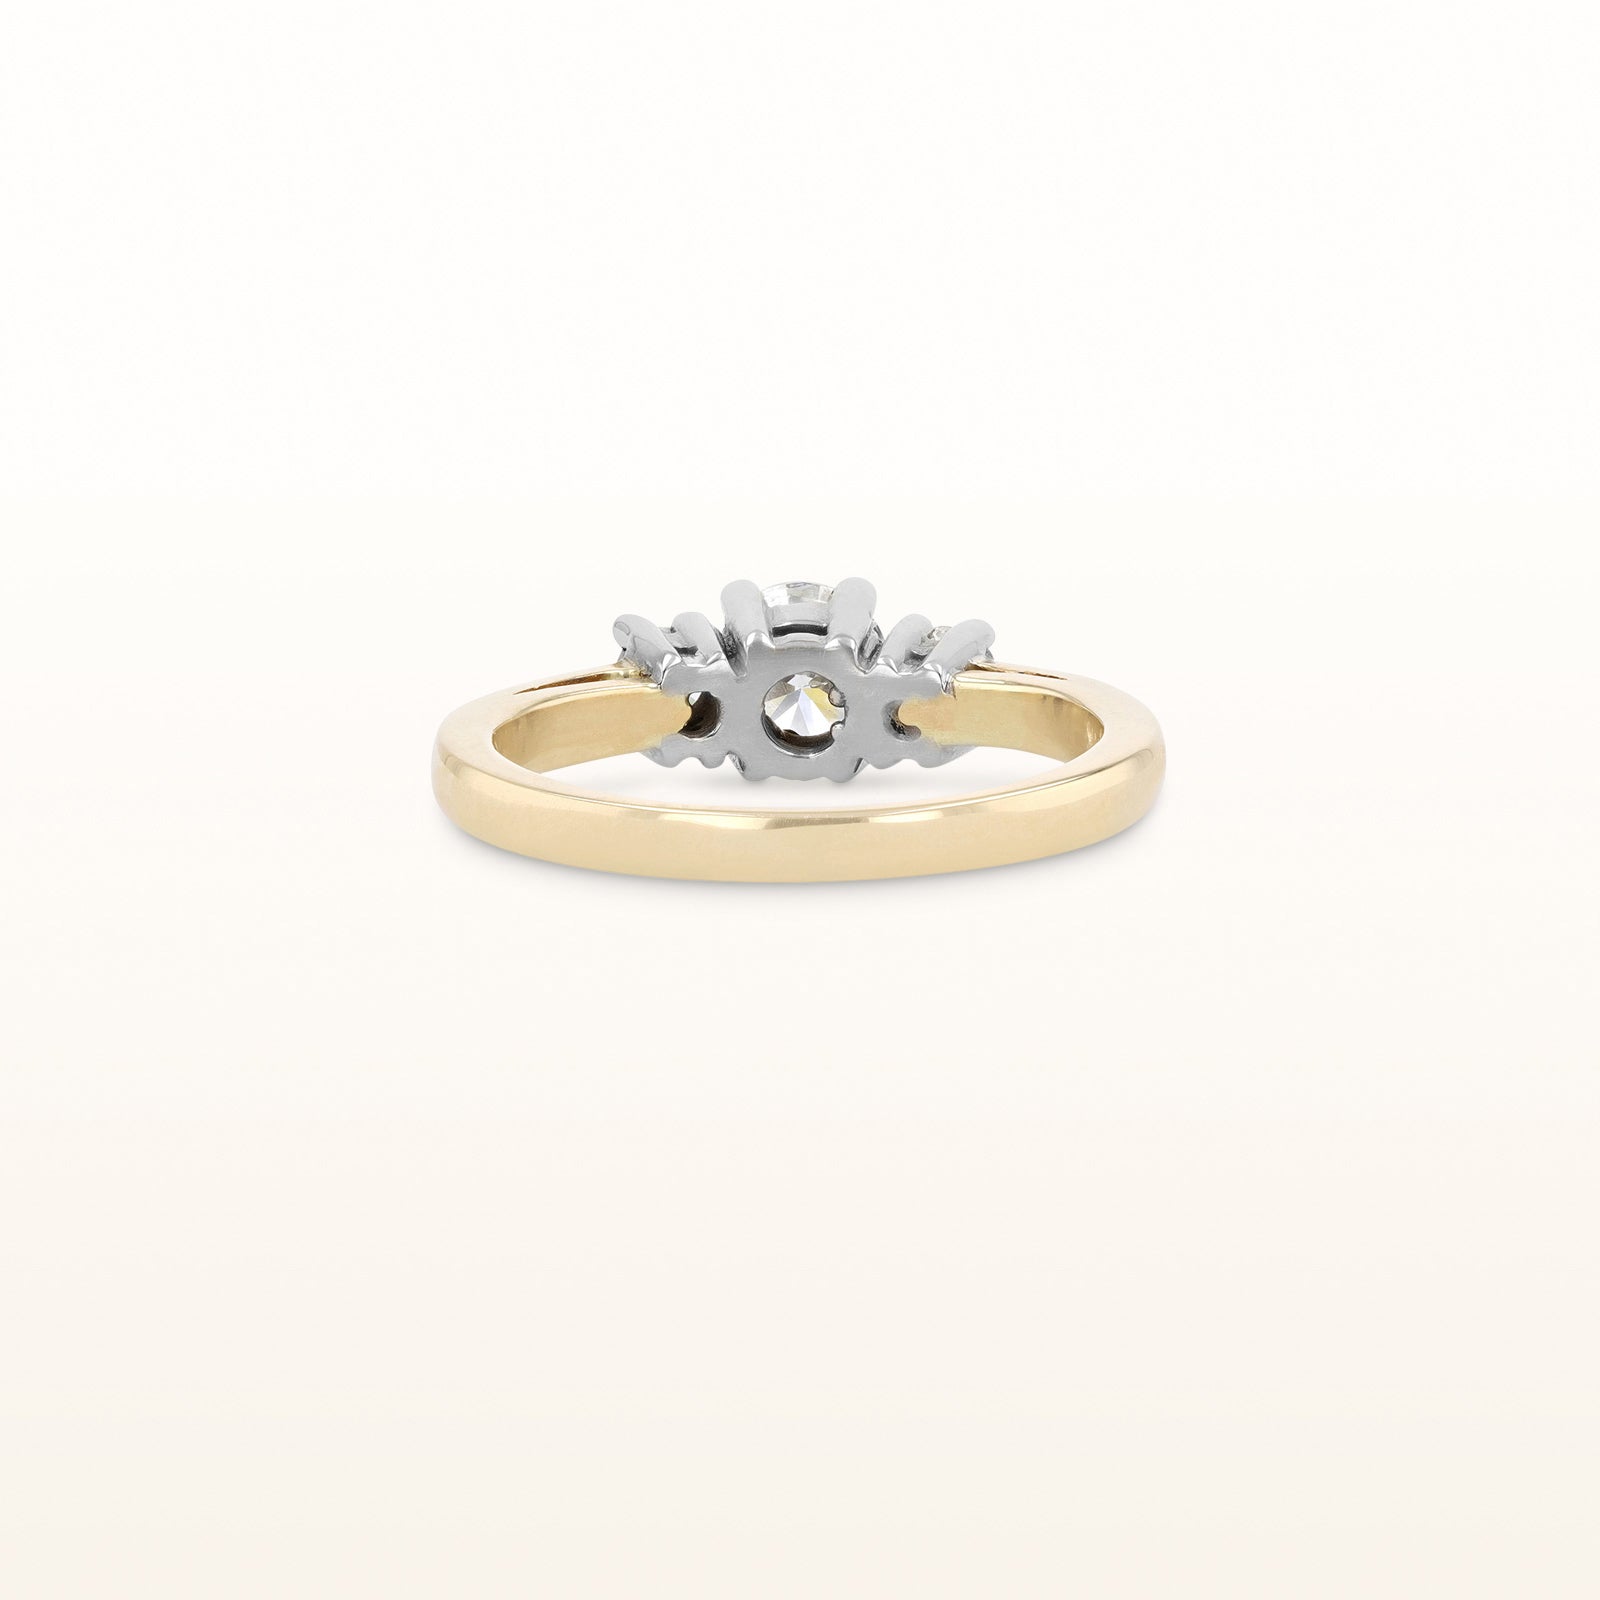 0.84 ctw 3-Stone Diamond Engagement Ring in 14kt Yellow Gold